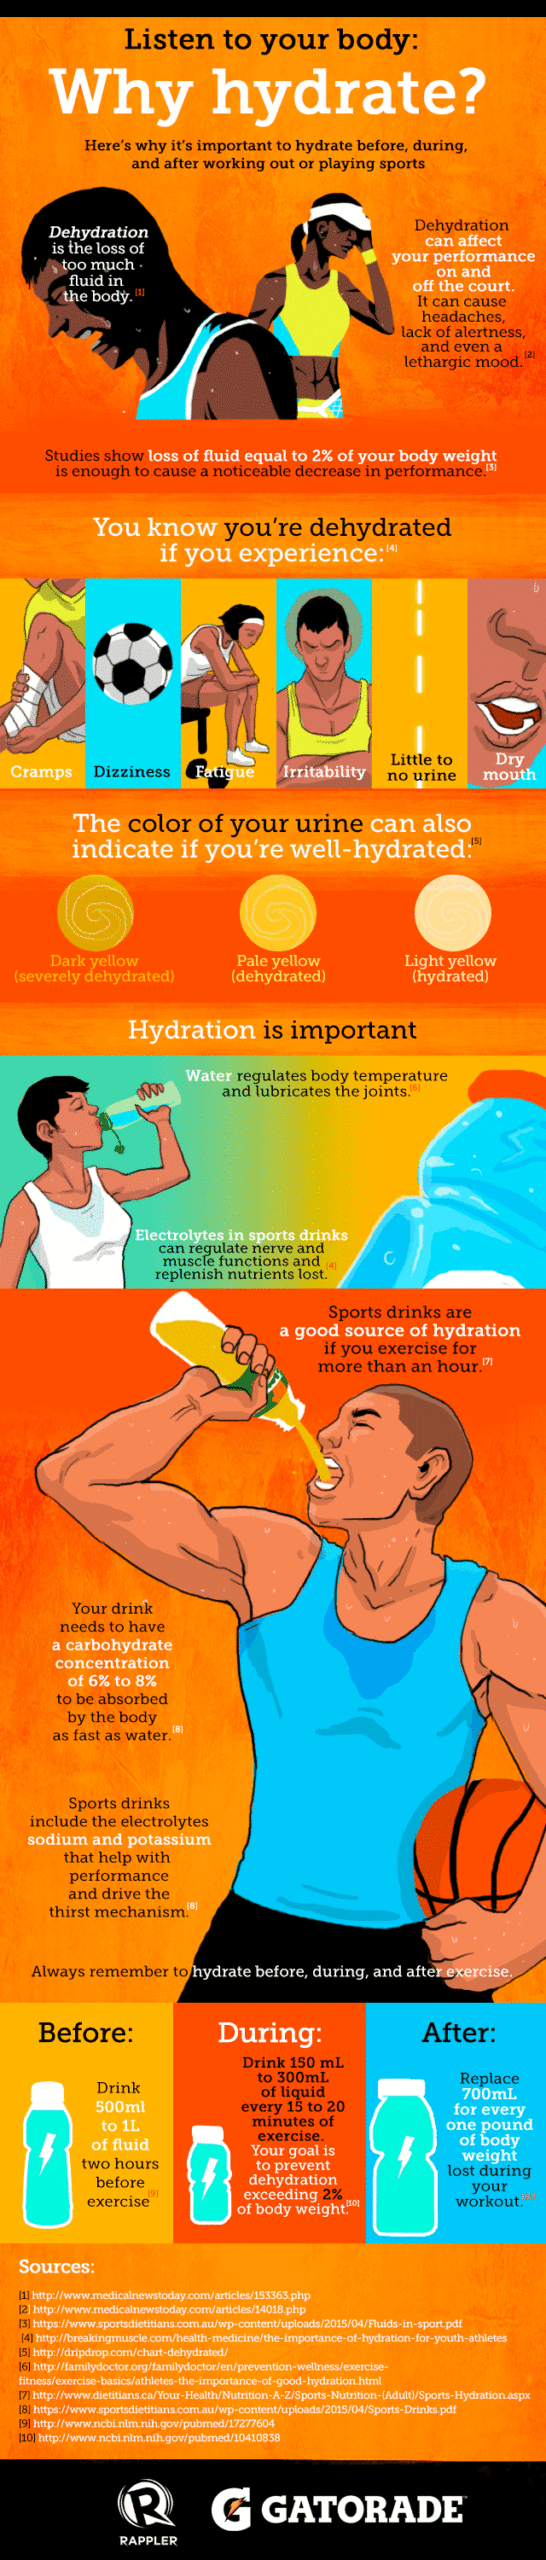 Listen to your body: Why hydrate?